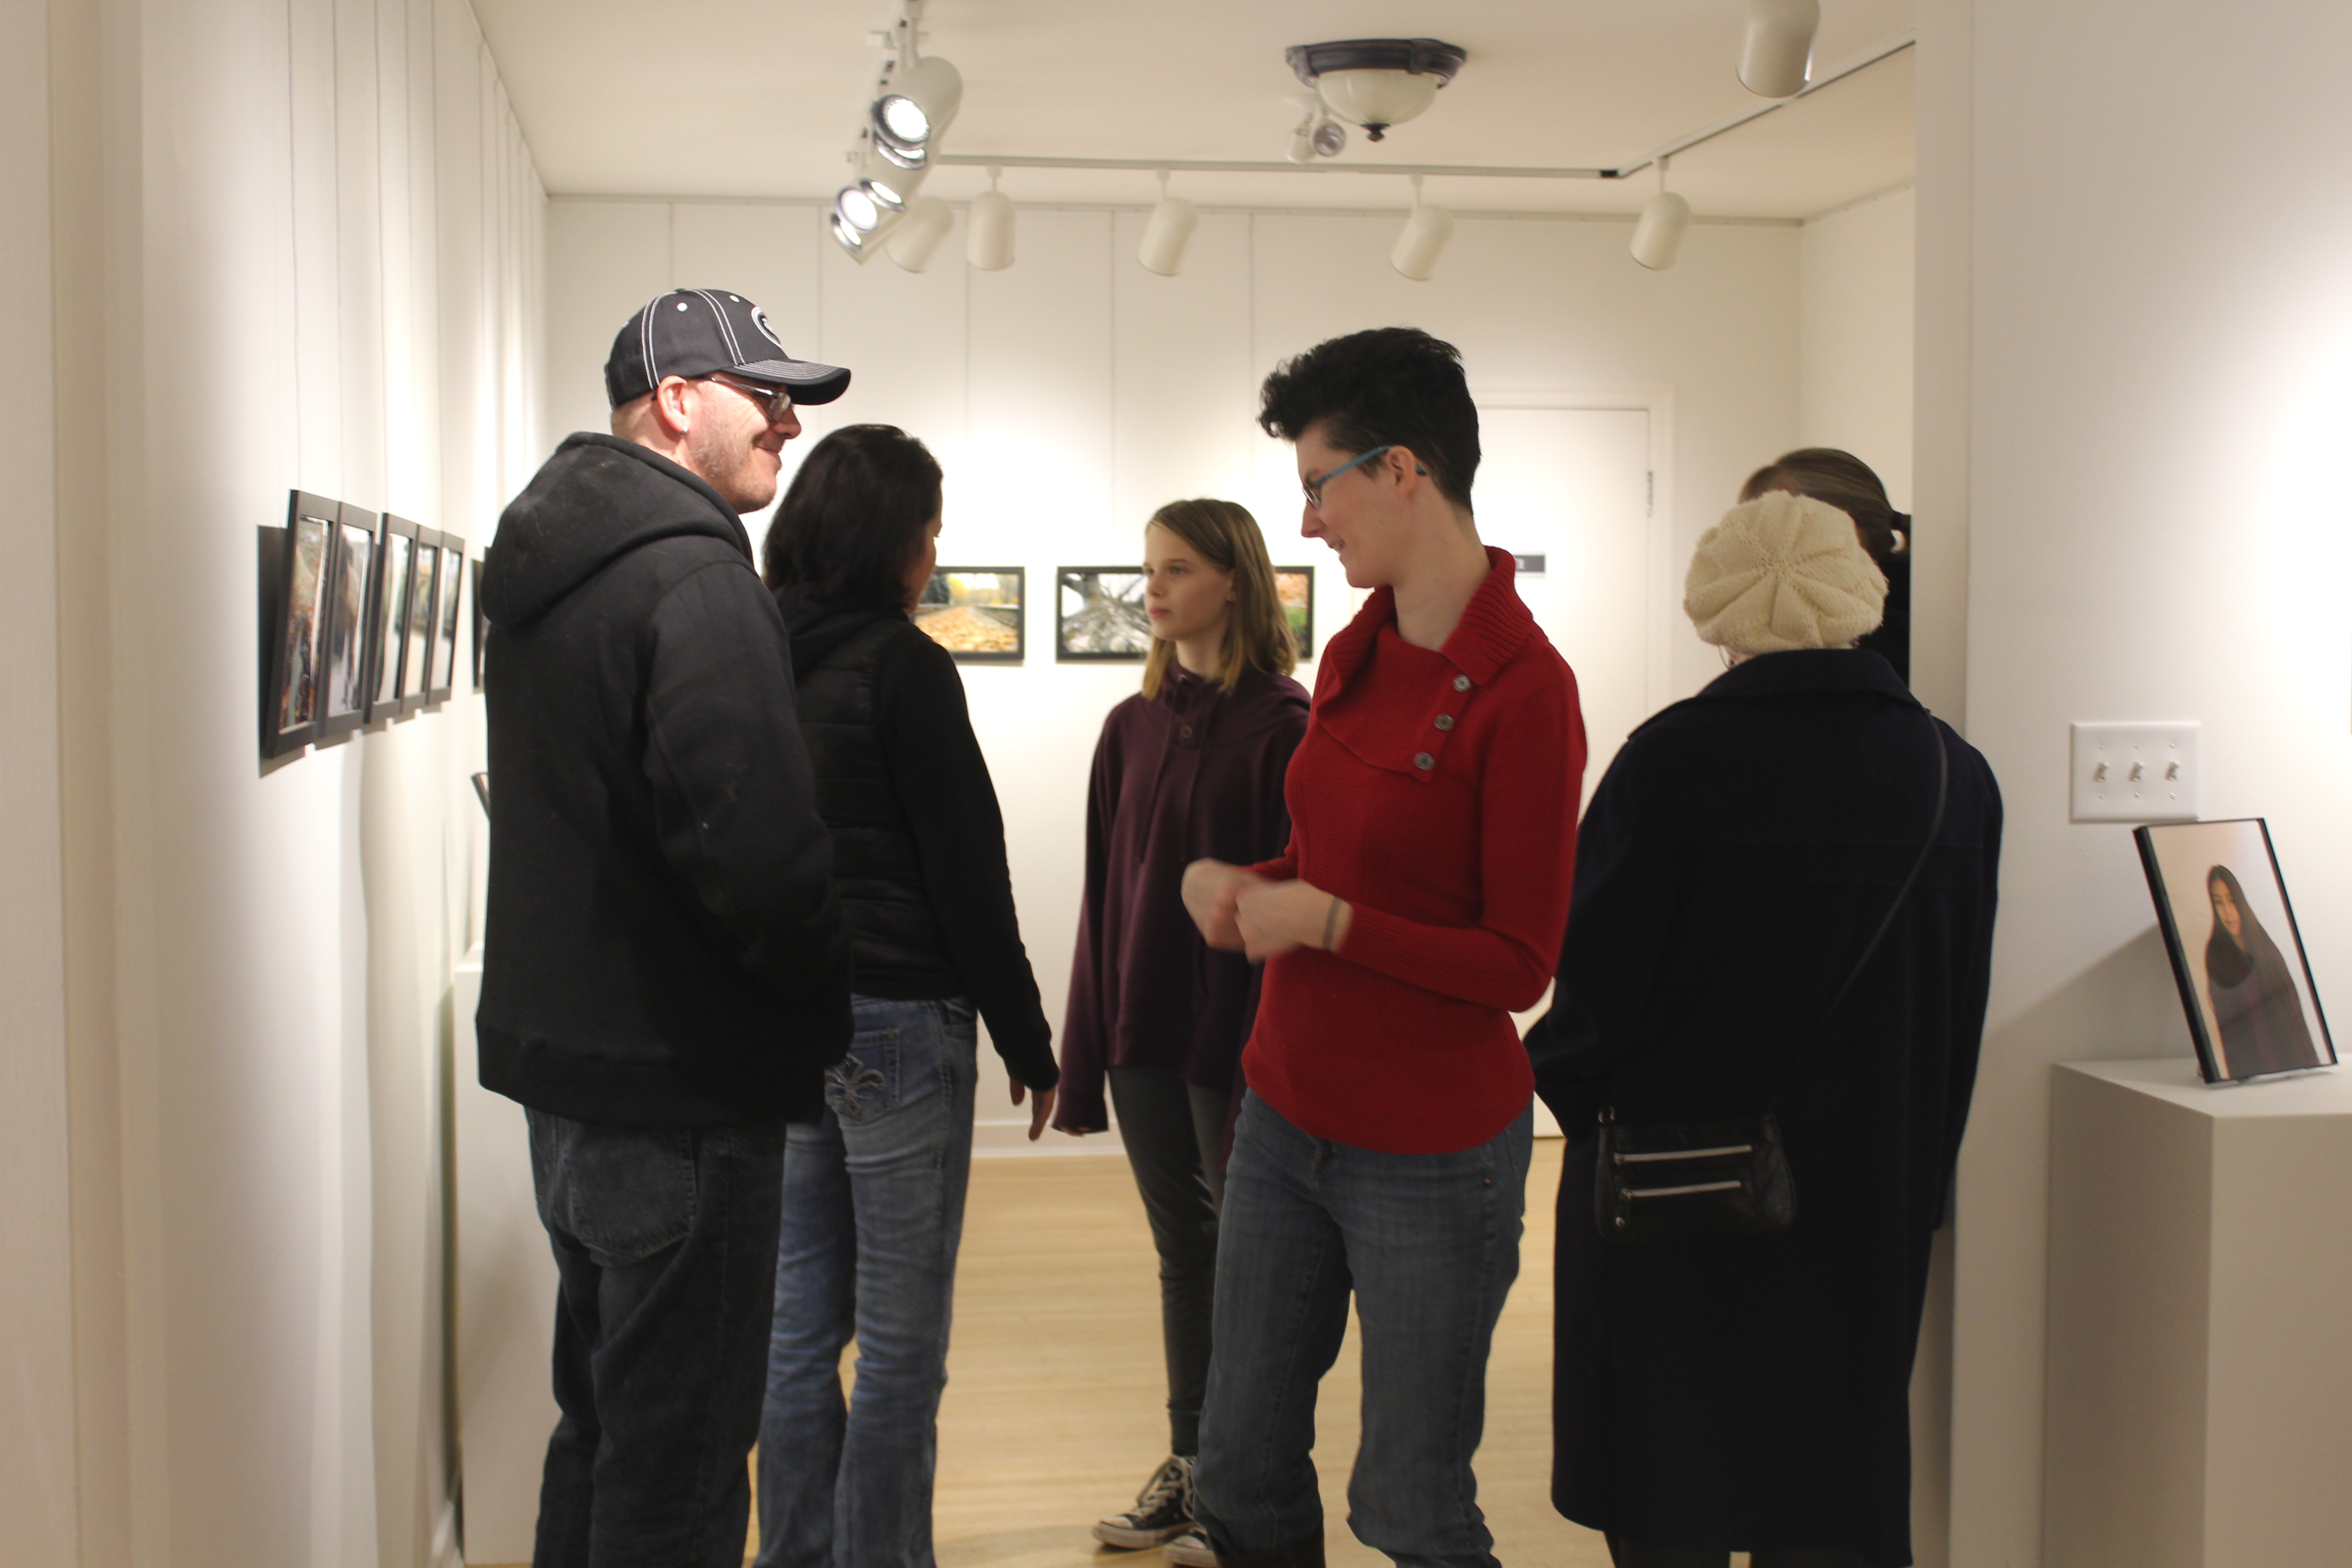 Youth photographers display work at the Kariton Art Gallery